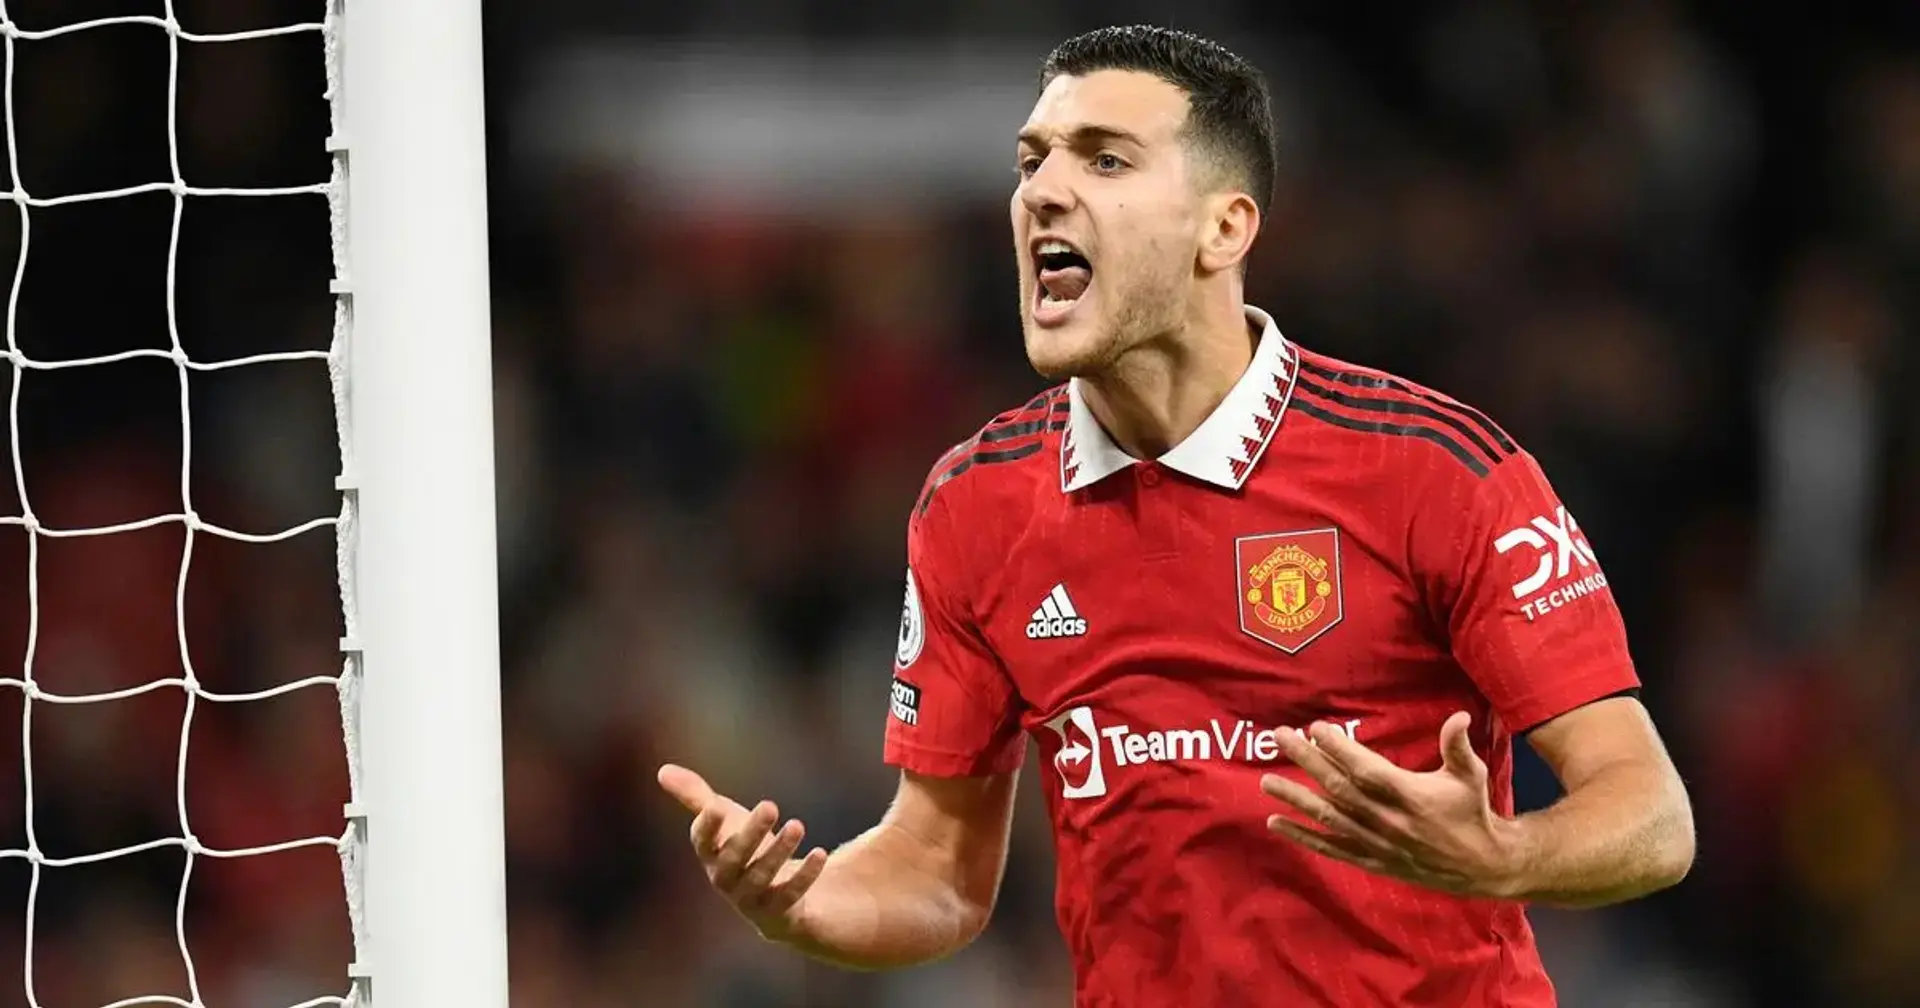 Real Madrid set to scout Dalot & 3 more under-radar stories at Man United today